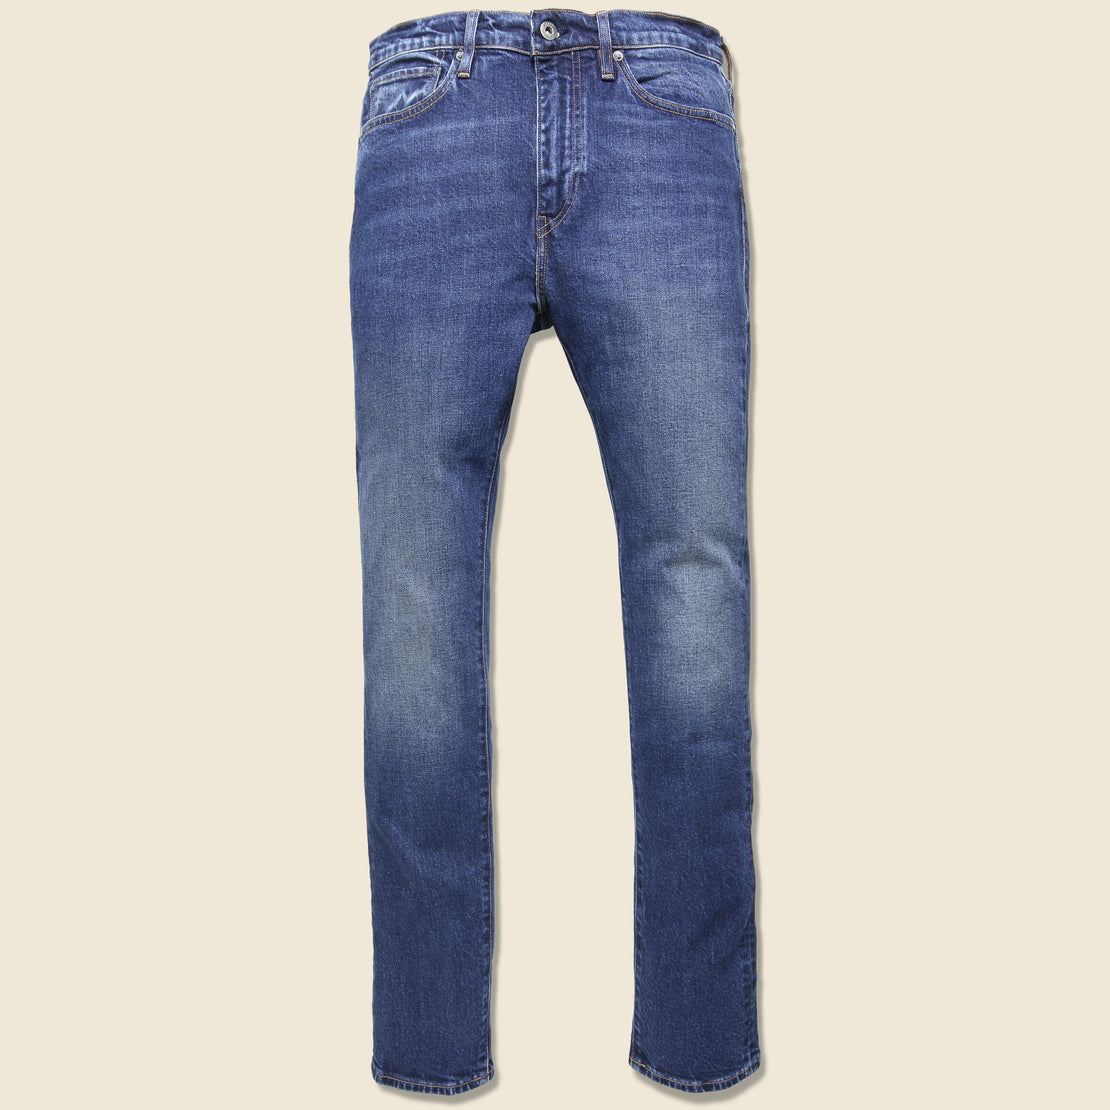 Levis Made & Crafted 510 Jean - Aylin